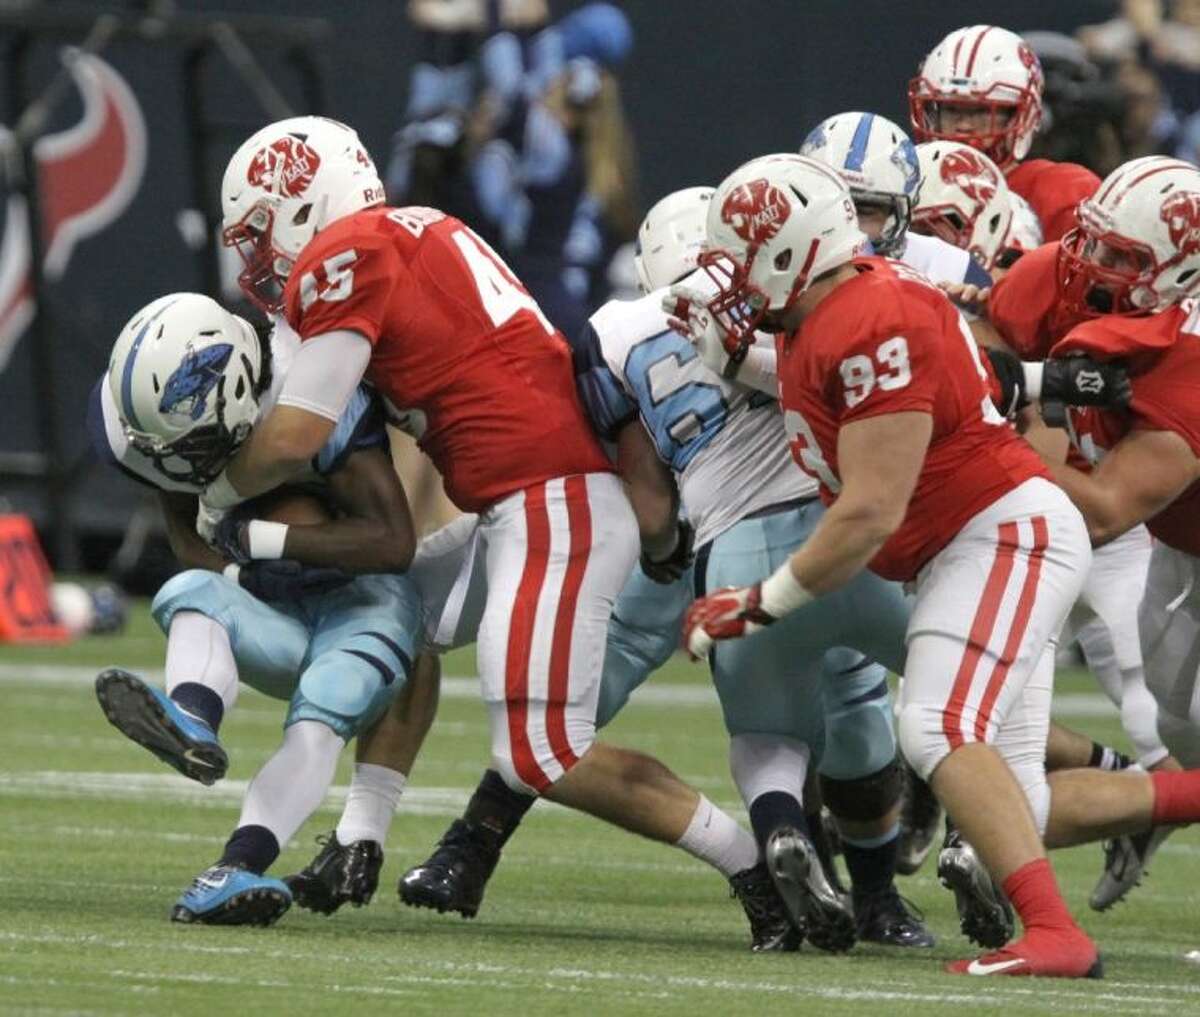 Katy's Jake Blomstrom stops Johnson's Braedon Williams during State Semifinals game at Reliant Stadium in Houston on Saturday, Decemeber 14, 2013. Katy won the game 52-0.